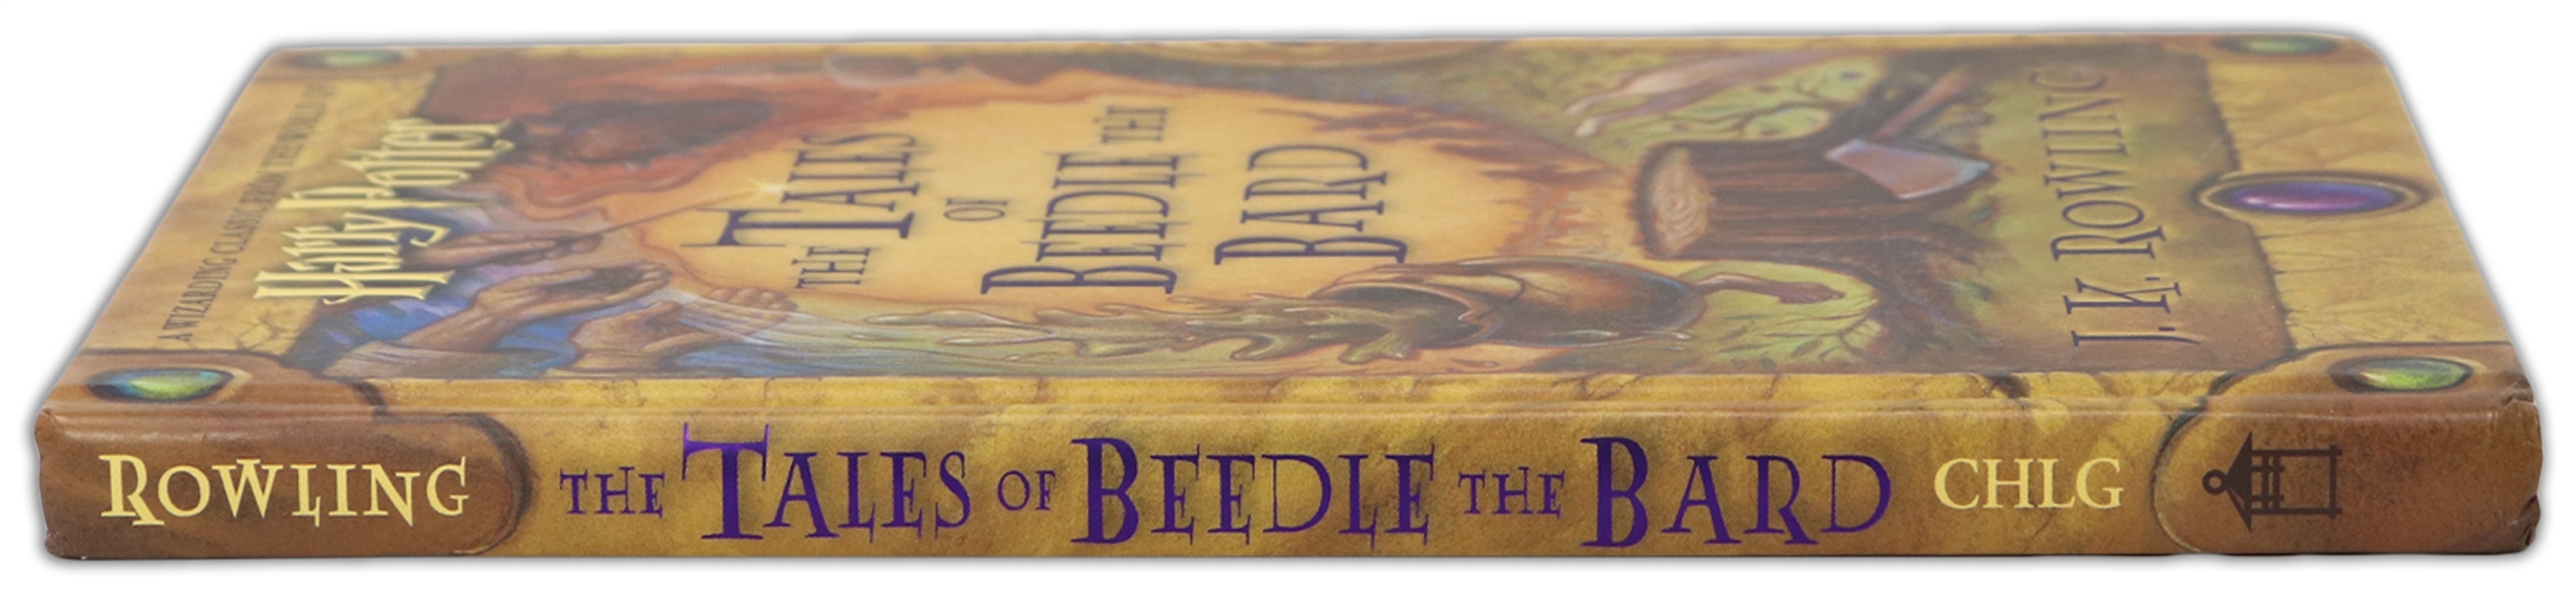 J.K. Rowling Signed First U.S. Edition of ''The Tales of Beedle the Bard'' -- With Beckett COA